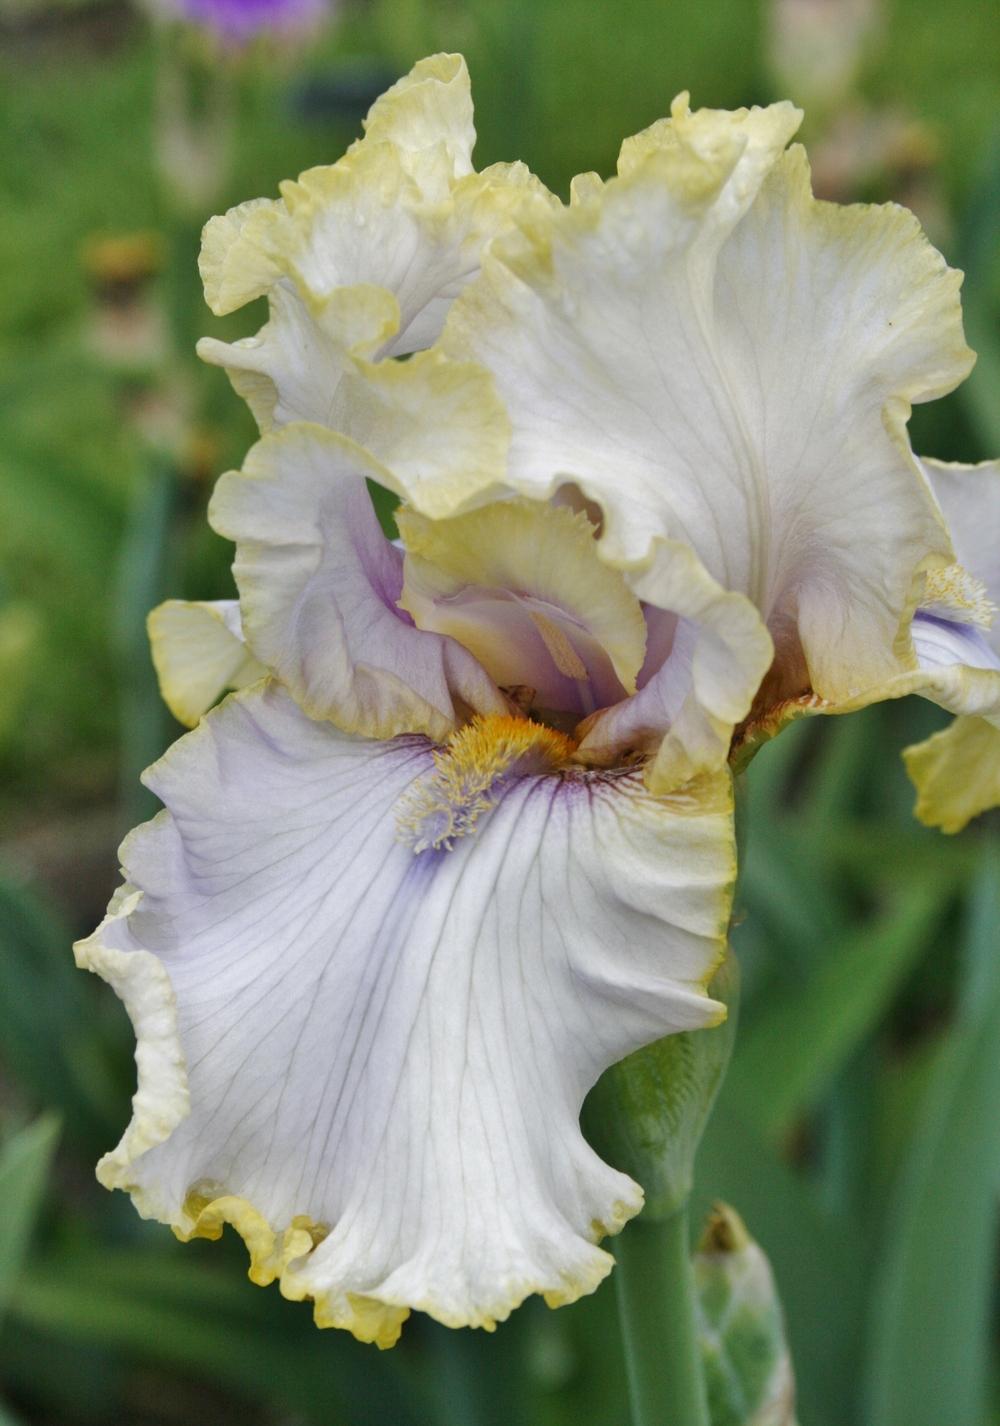 Photo of Tall Bearded Iris (Iris 'Pewter and Gold') uploaded by Calif_Sue